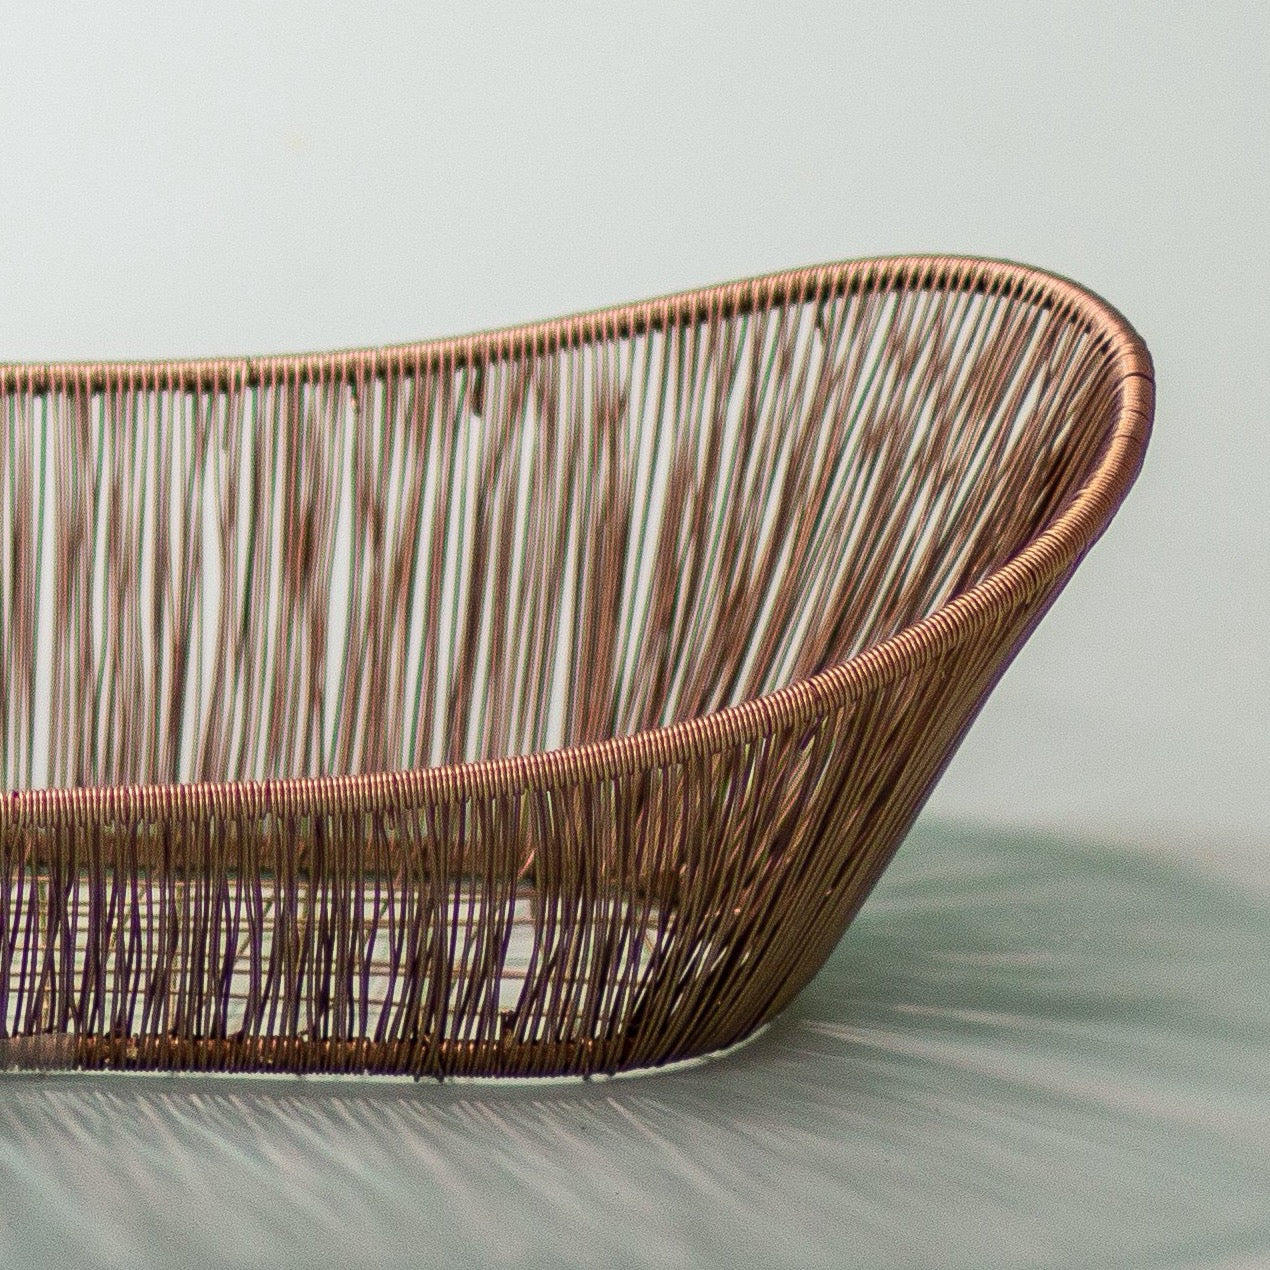 BASKET WIRE OVAL SMALL (Available in 3 Colors)